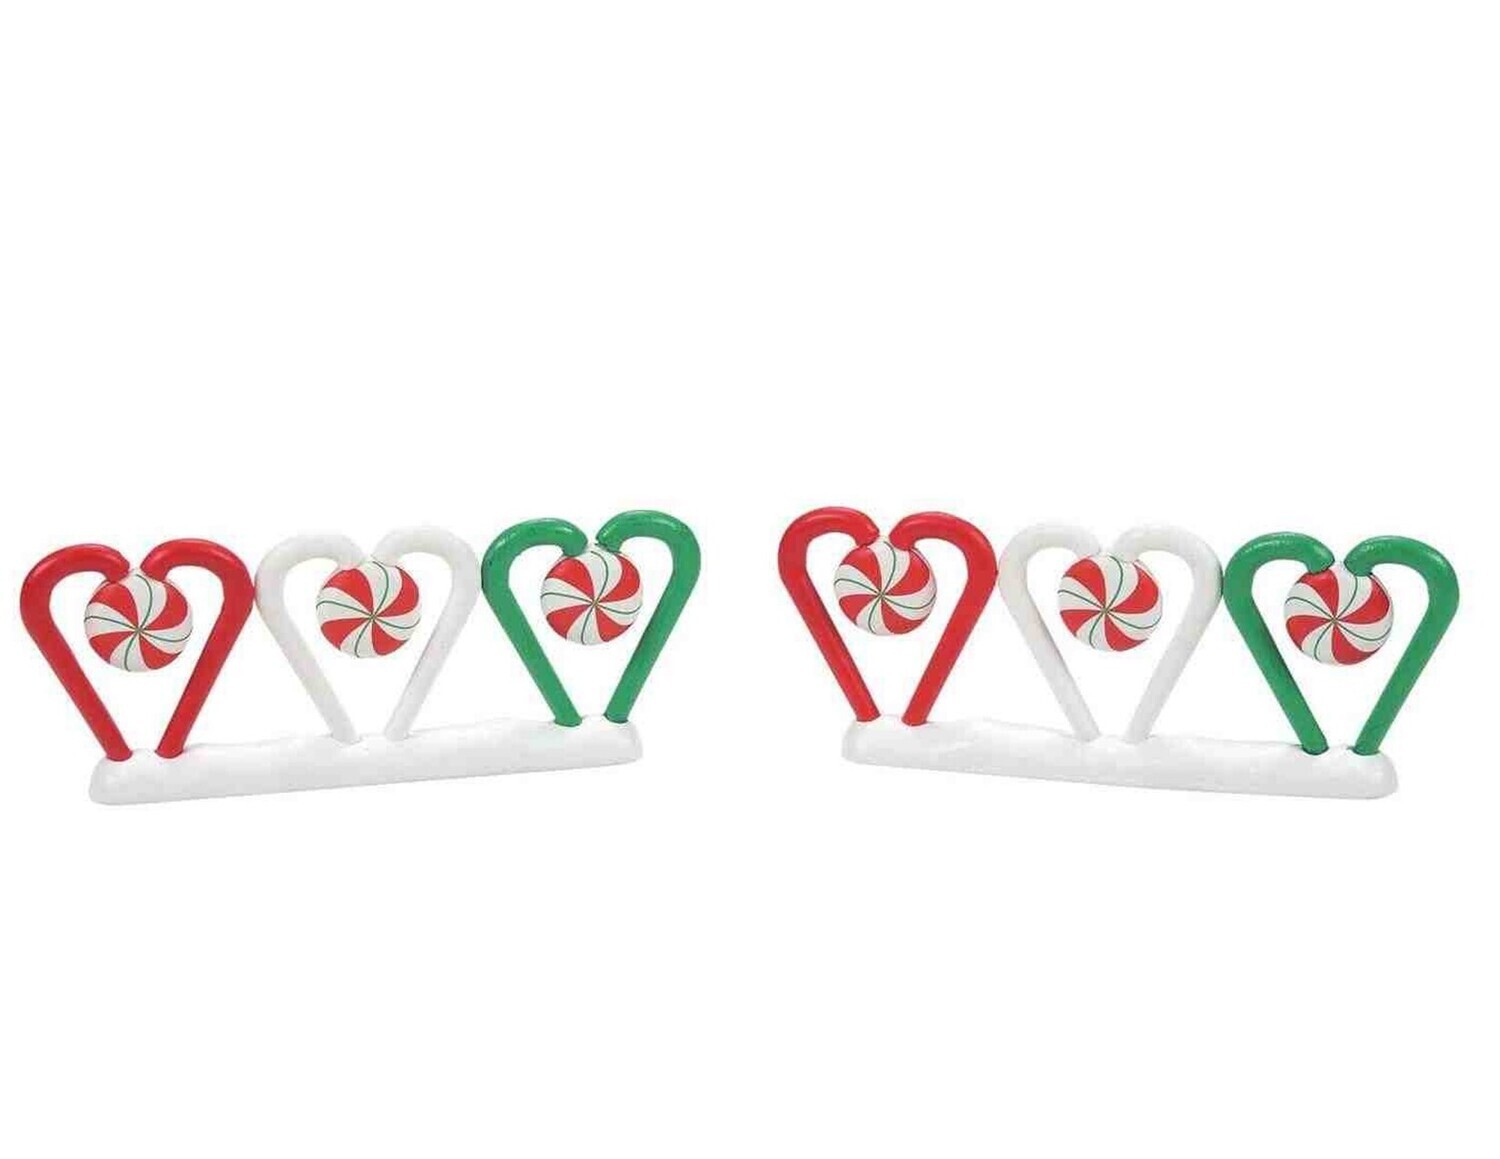 Department 56 "Candy Cane Fence, Set of 2" Village Accessory (6011458)